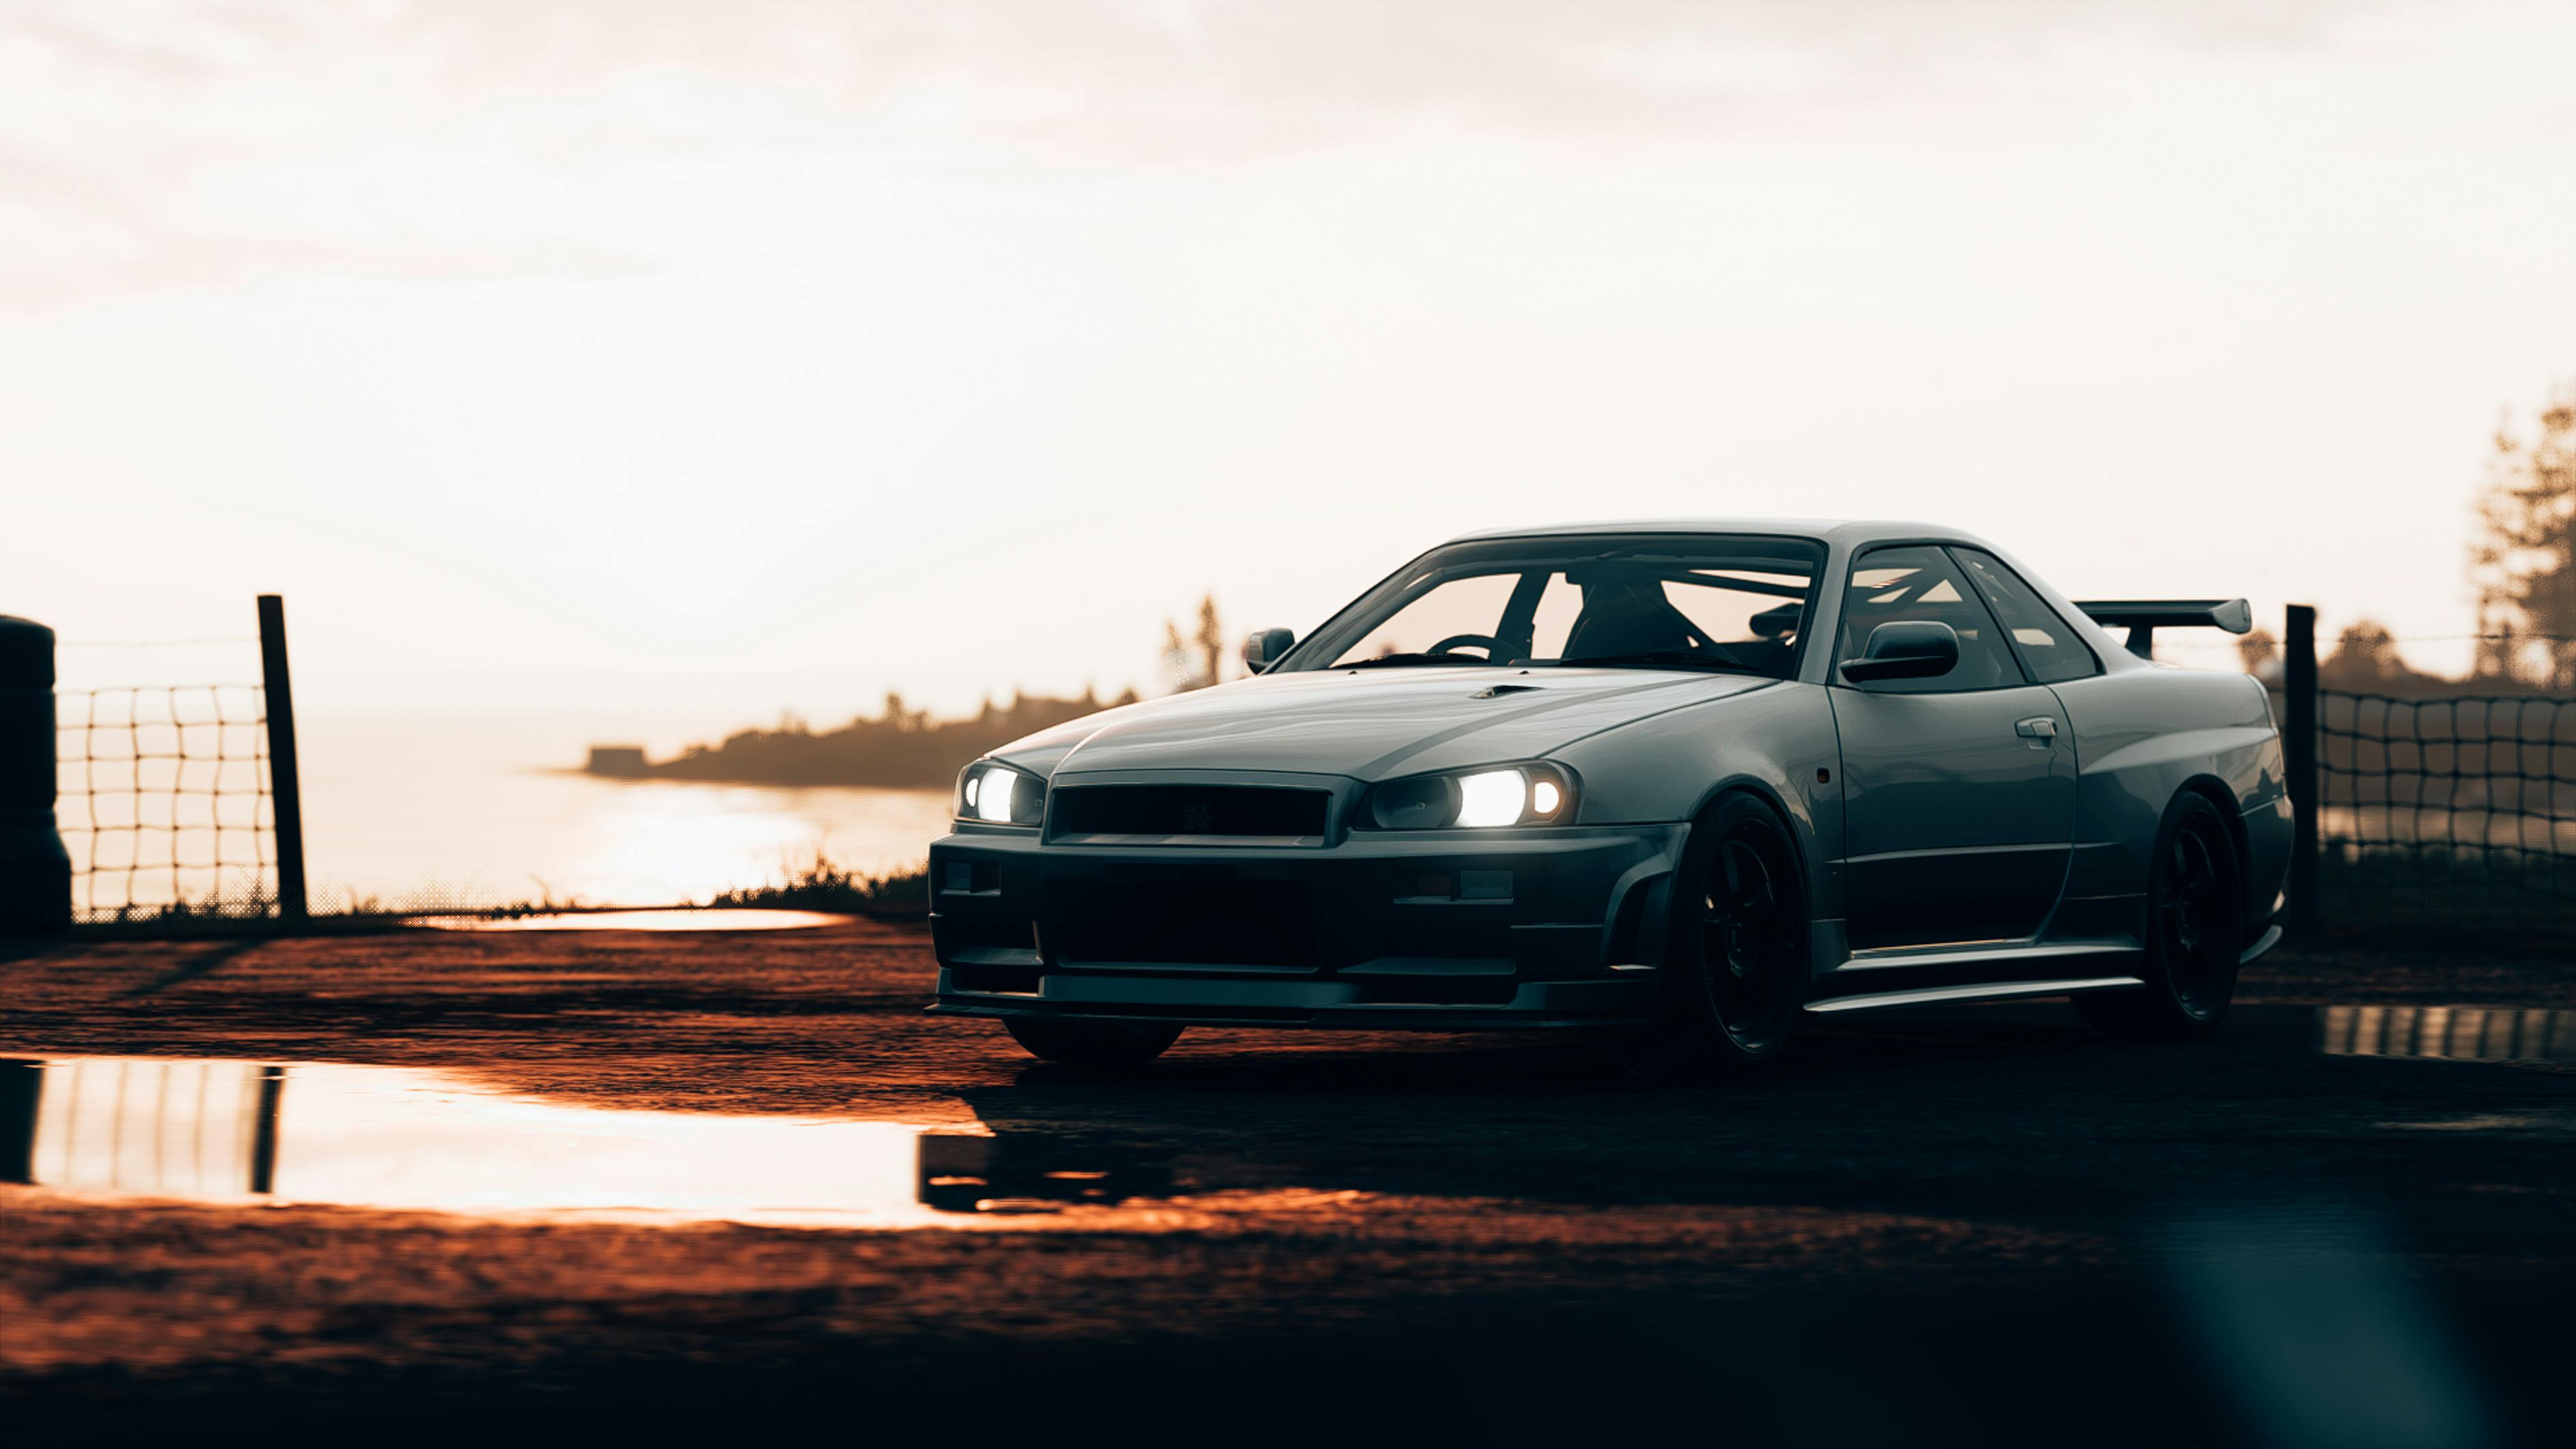 Gtr Photos, Download The BEST Free Gtr Stock Photos & HD Images